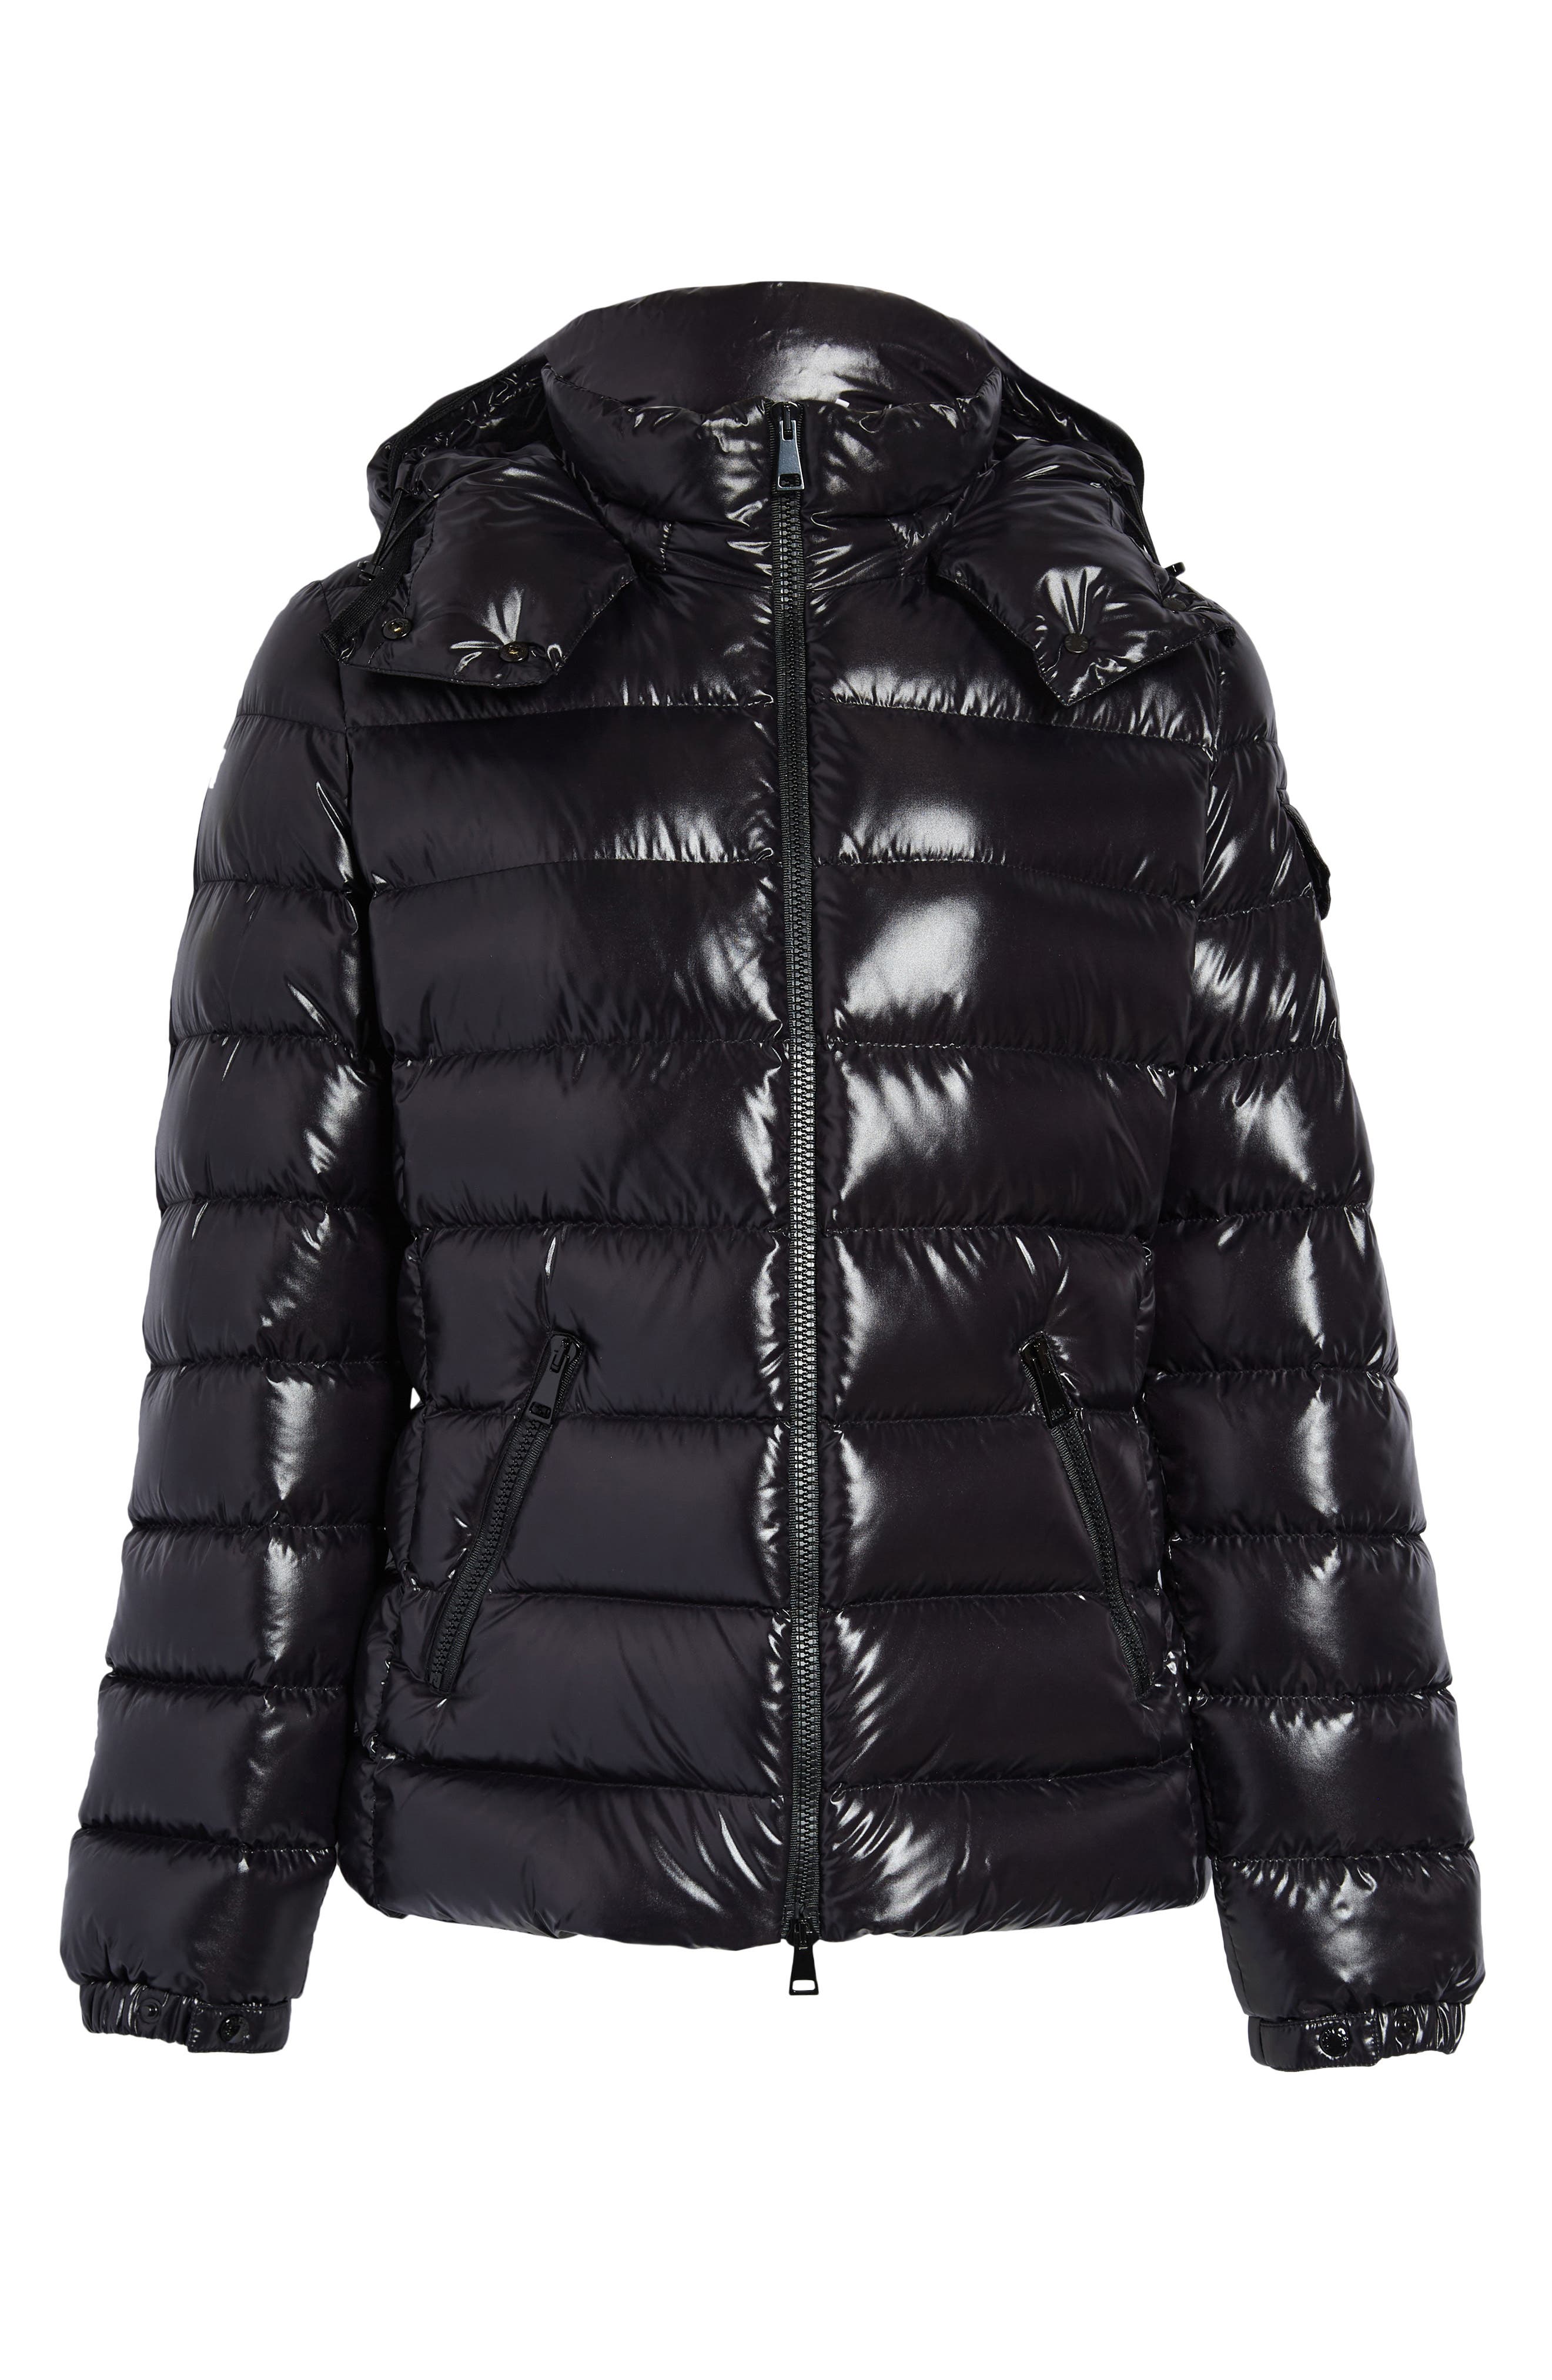 moncler jacket yupoo,Save up to 15%,www.ilcascinone.com